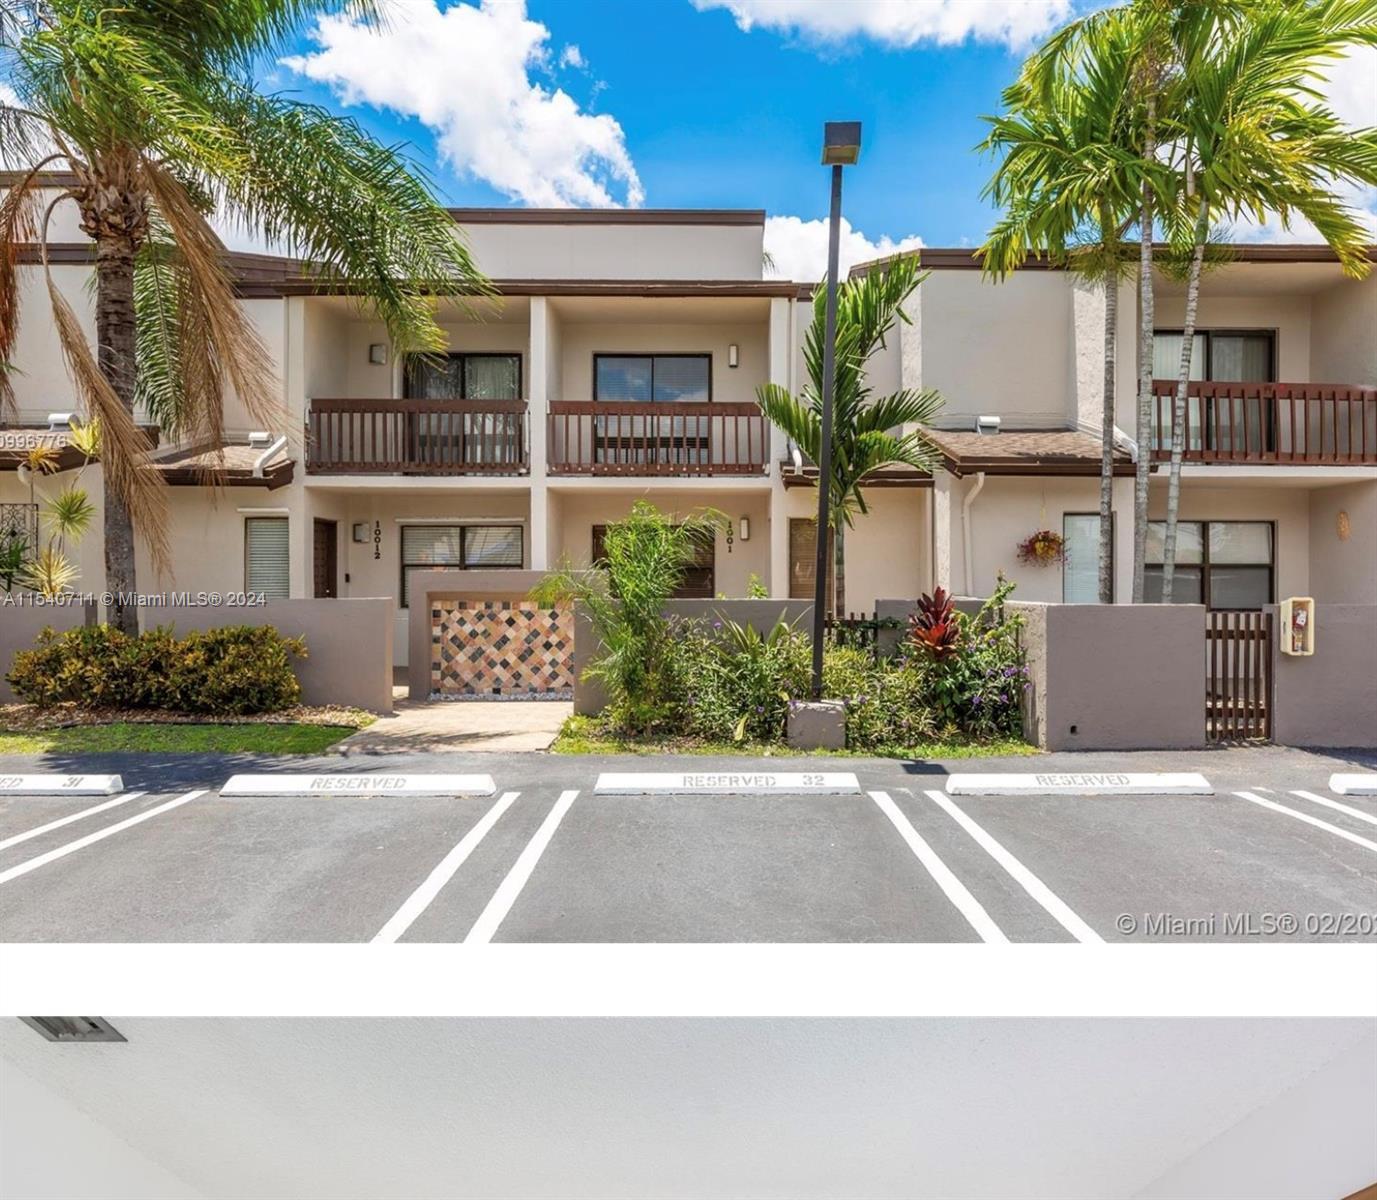 Don't miss out on this lovely 2 bedroom 2.5 bathroom home centrally located in Doral within the soug